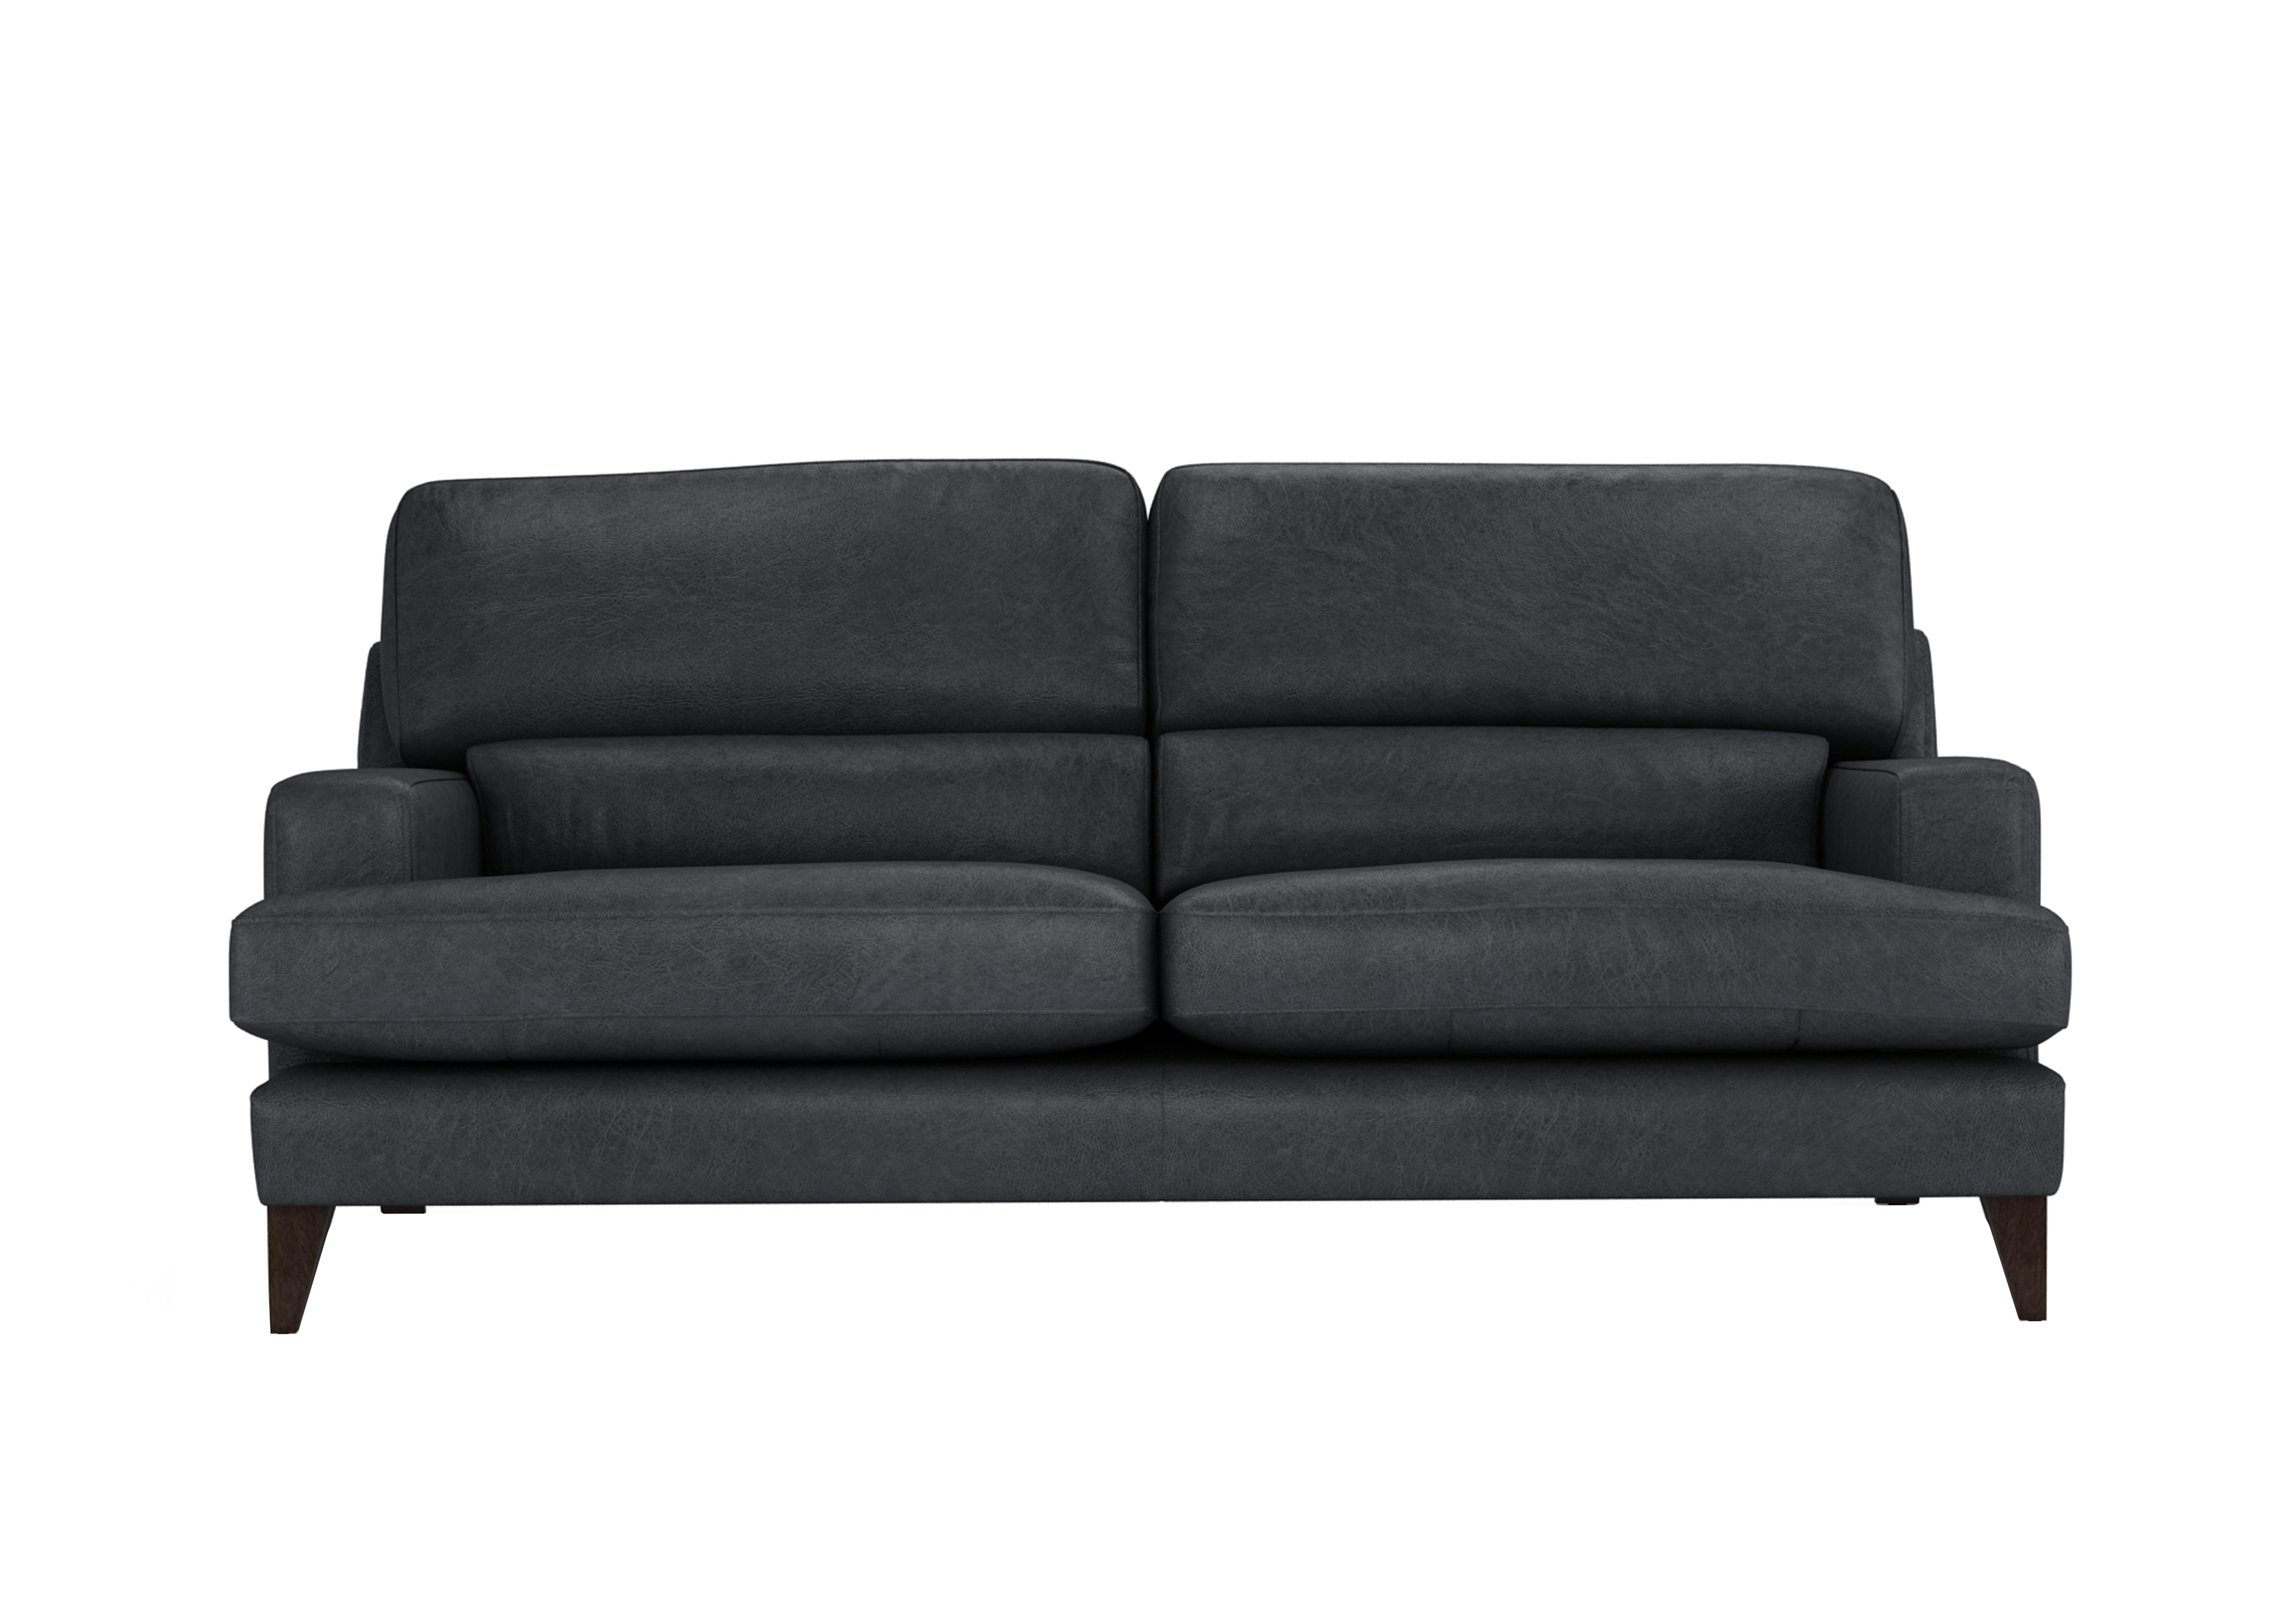 Romilly 3 Seater Leather Sofa in Sha188 Shadow Wa Ft on Furniture Village